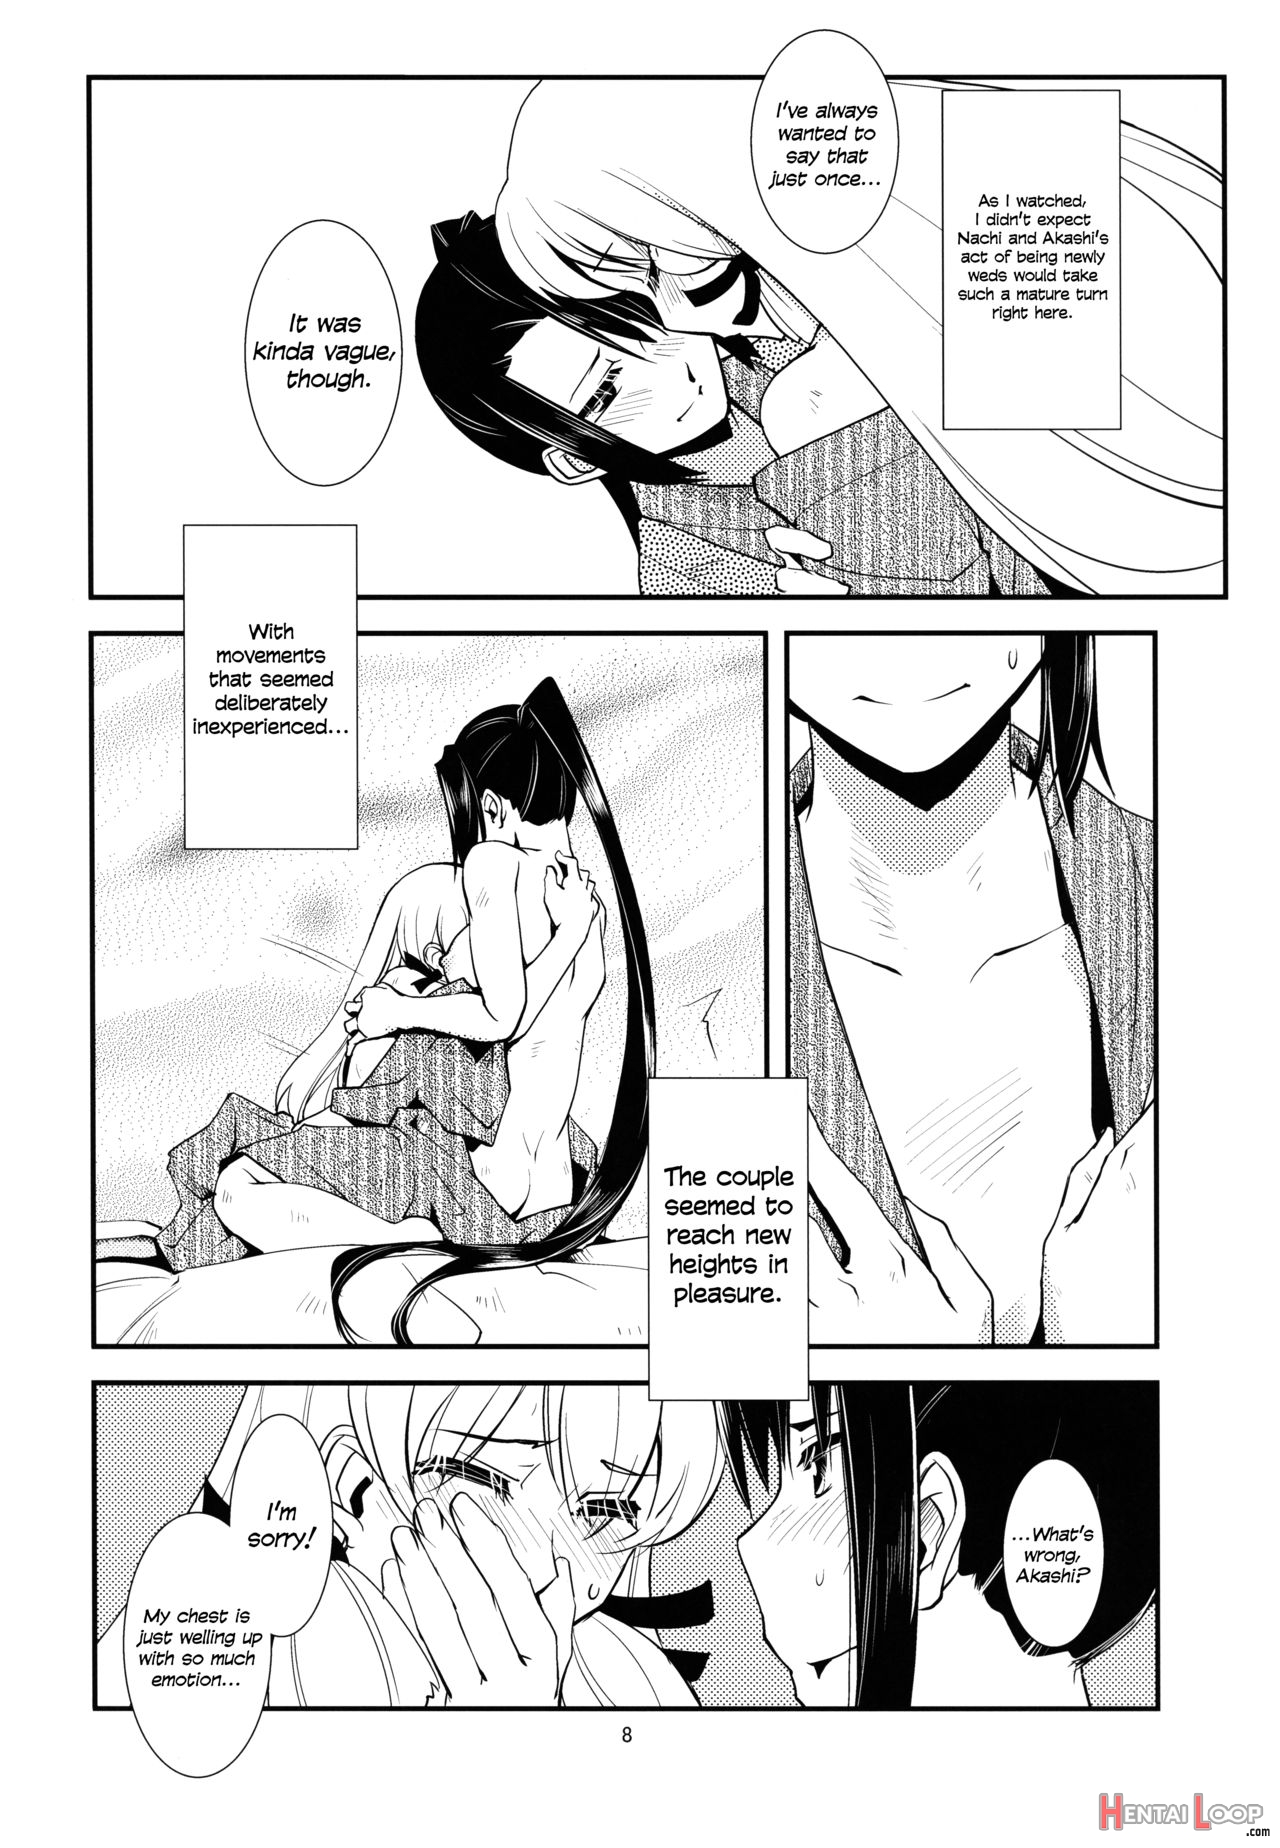 Aoba's Unexpected Secret Report page 10